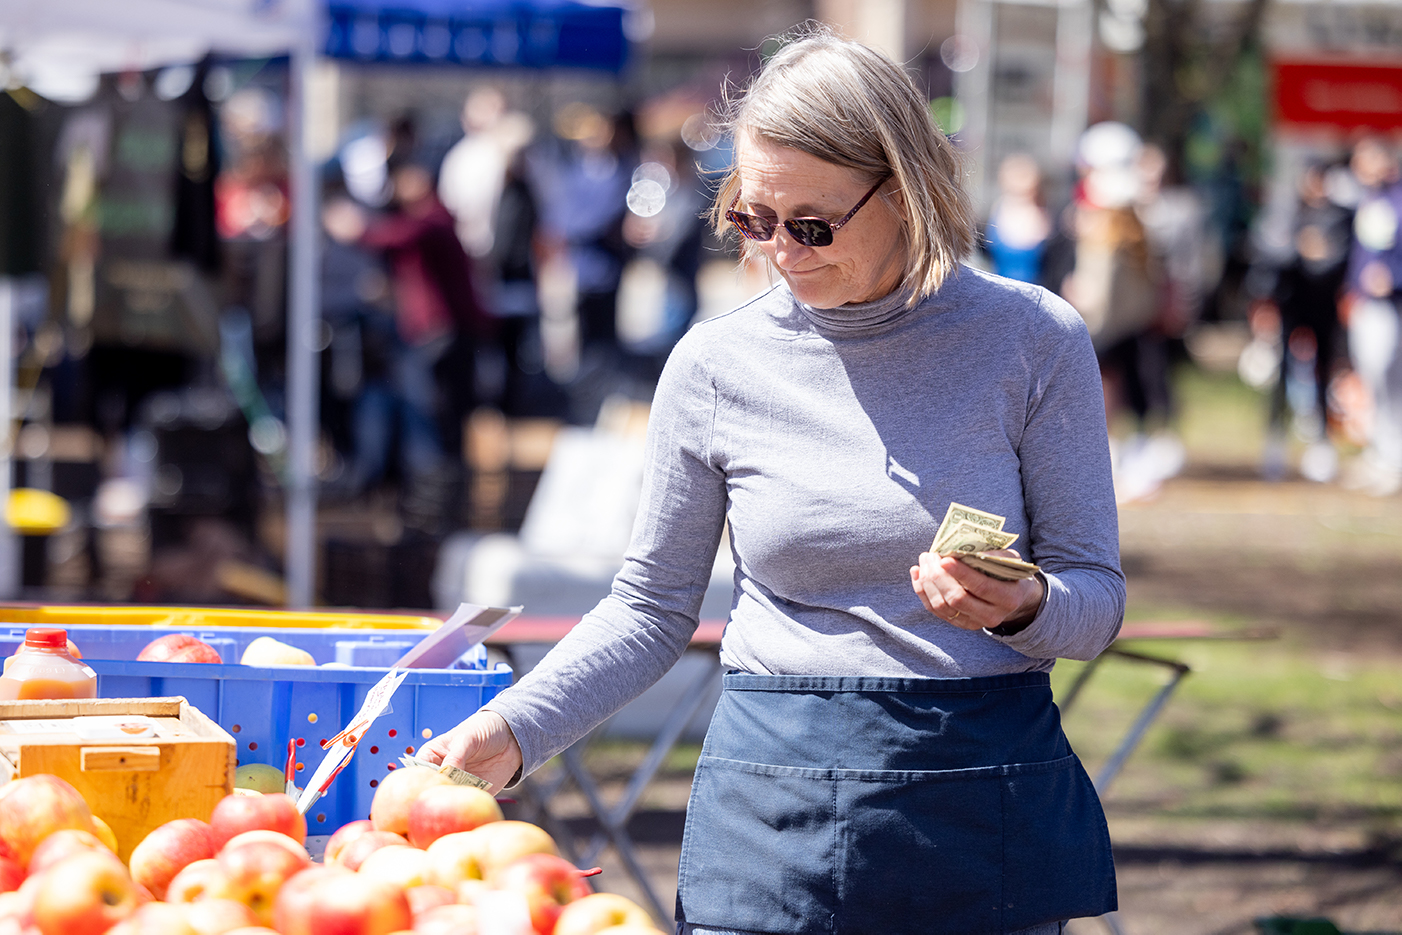 A woman holds cash while looking at apples